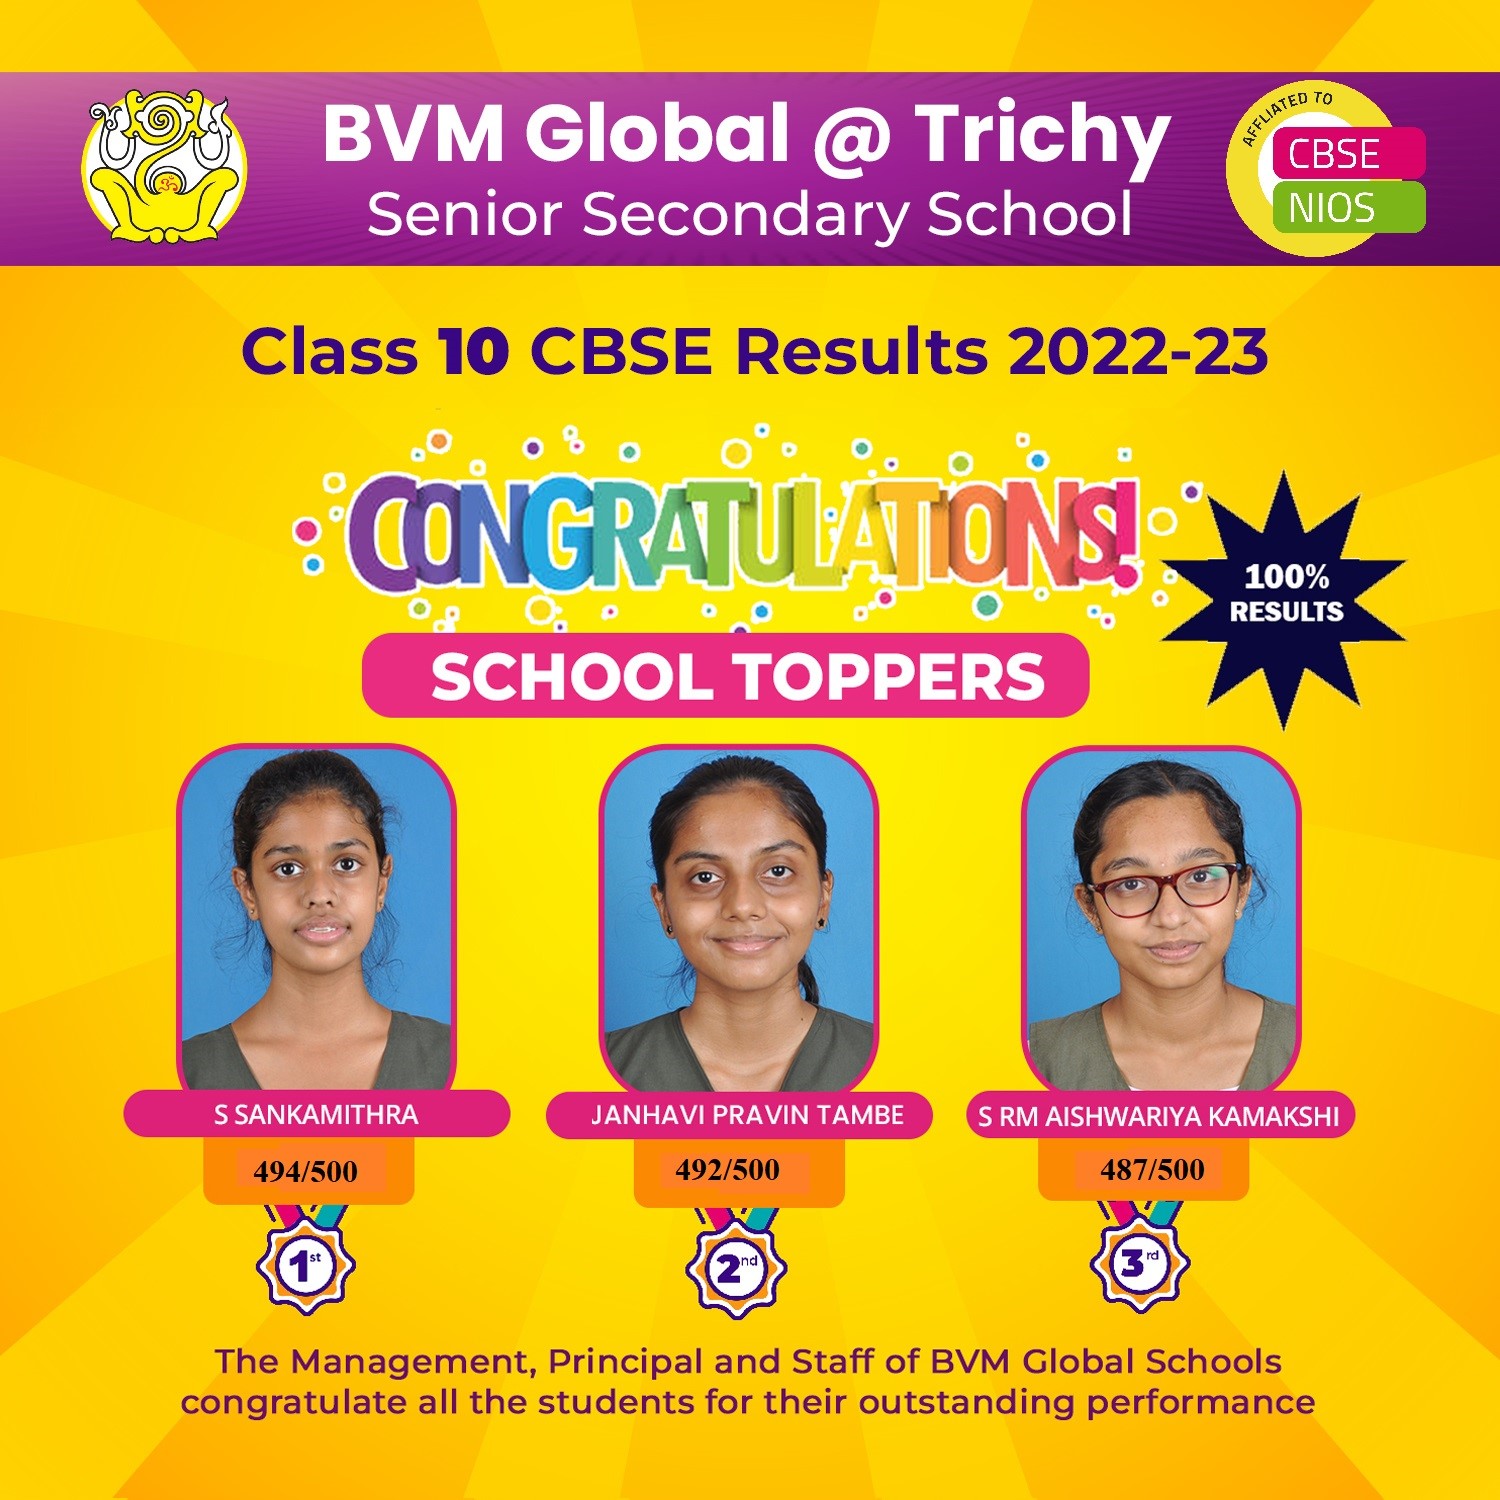 130520231035571815_CBSERESULTS-10TH-2022-2023-BVMTRY-schooltoppers(5).jpg